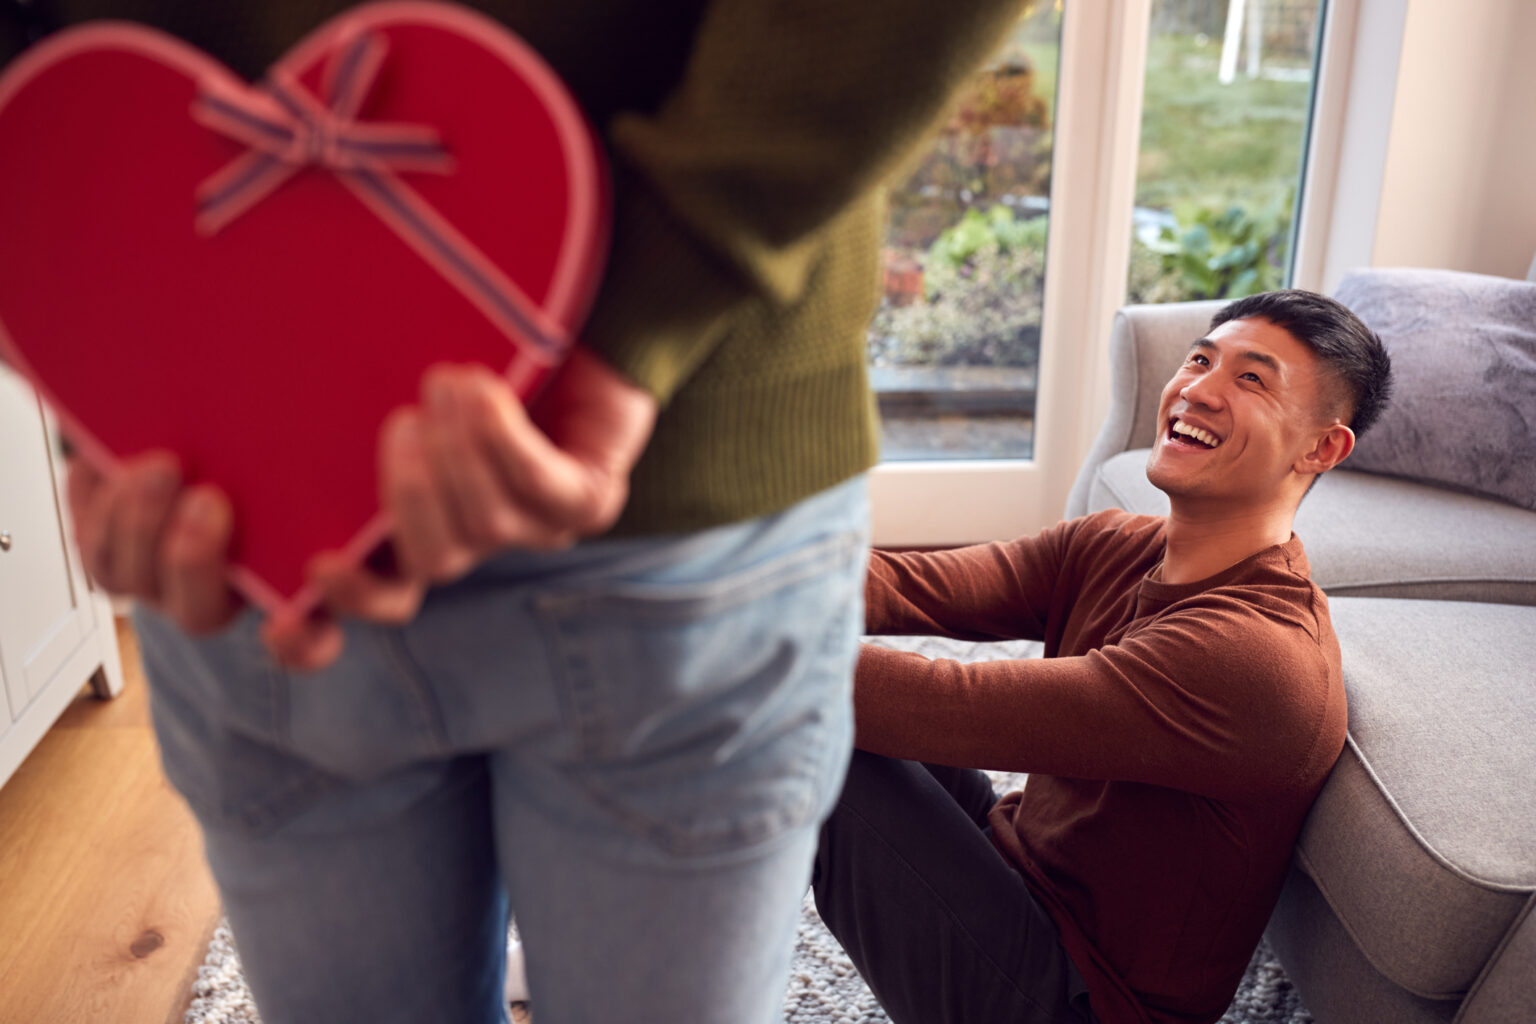 How should you handle Valentine’s Day if you’ve just started dating?